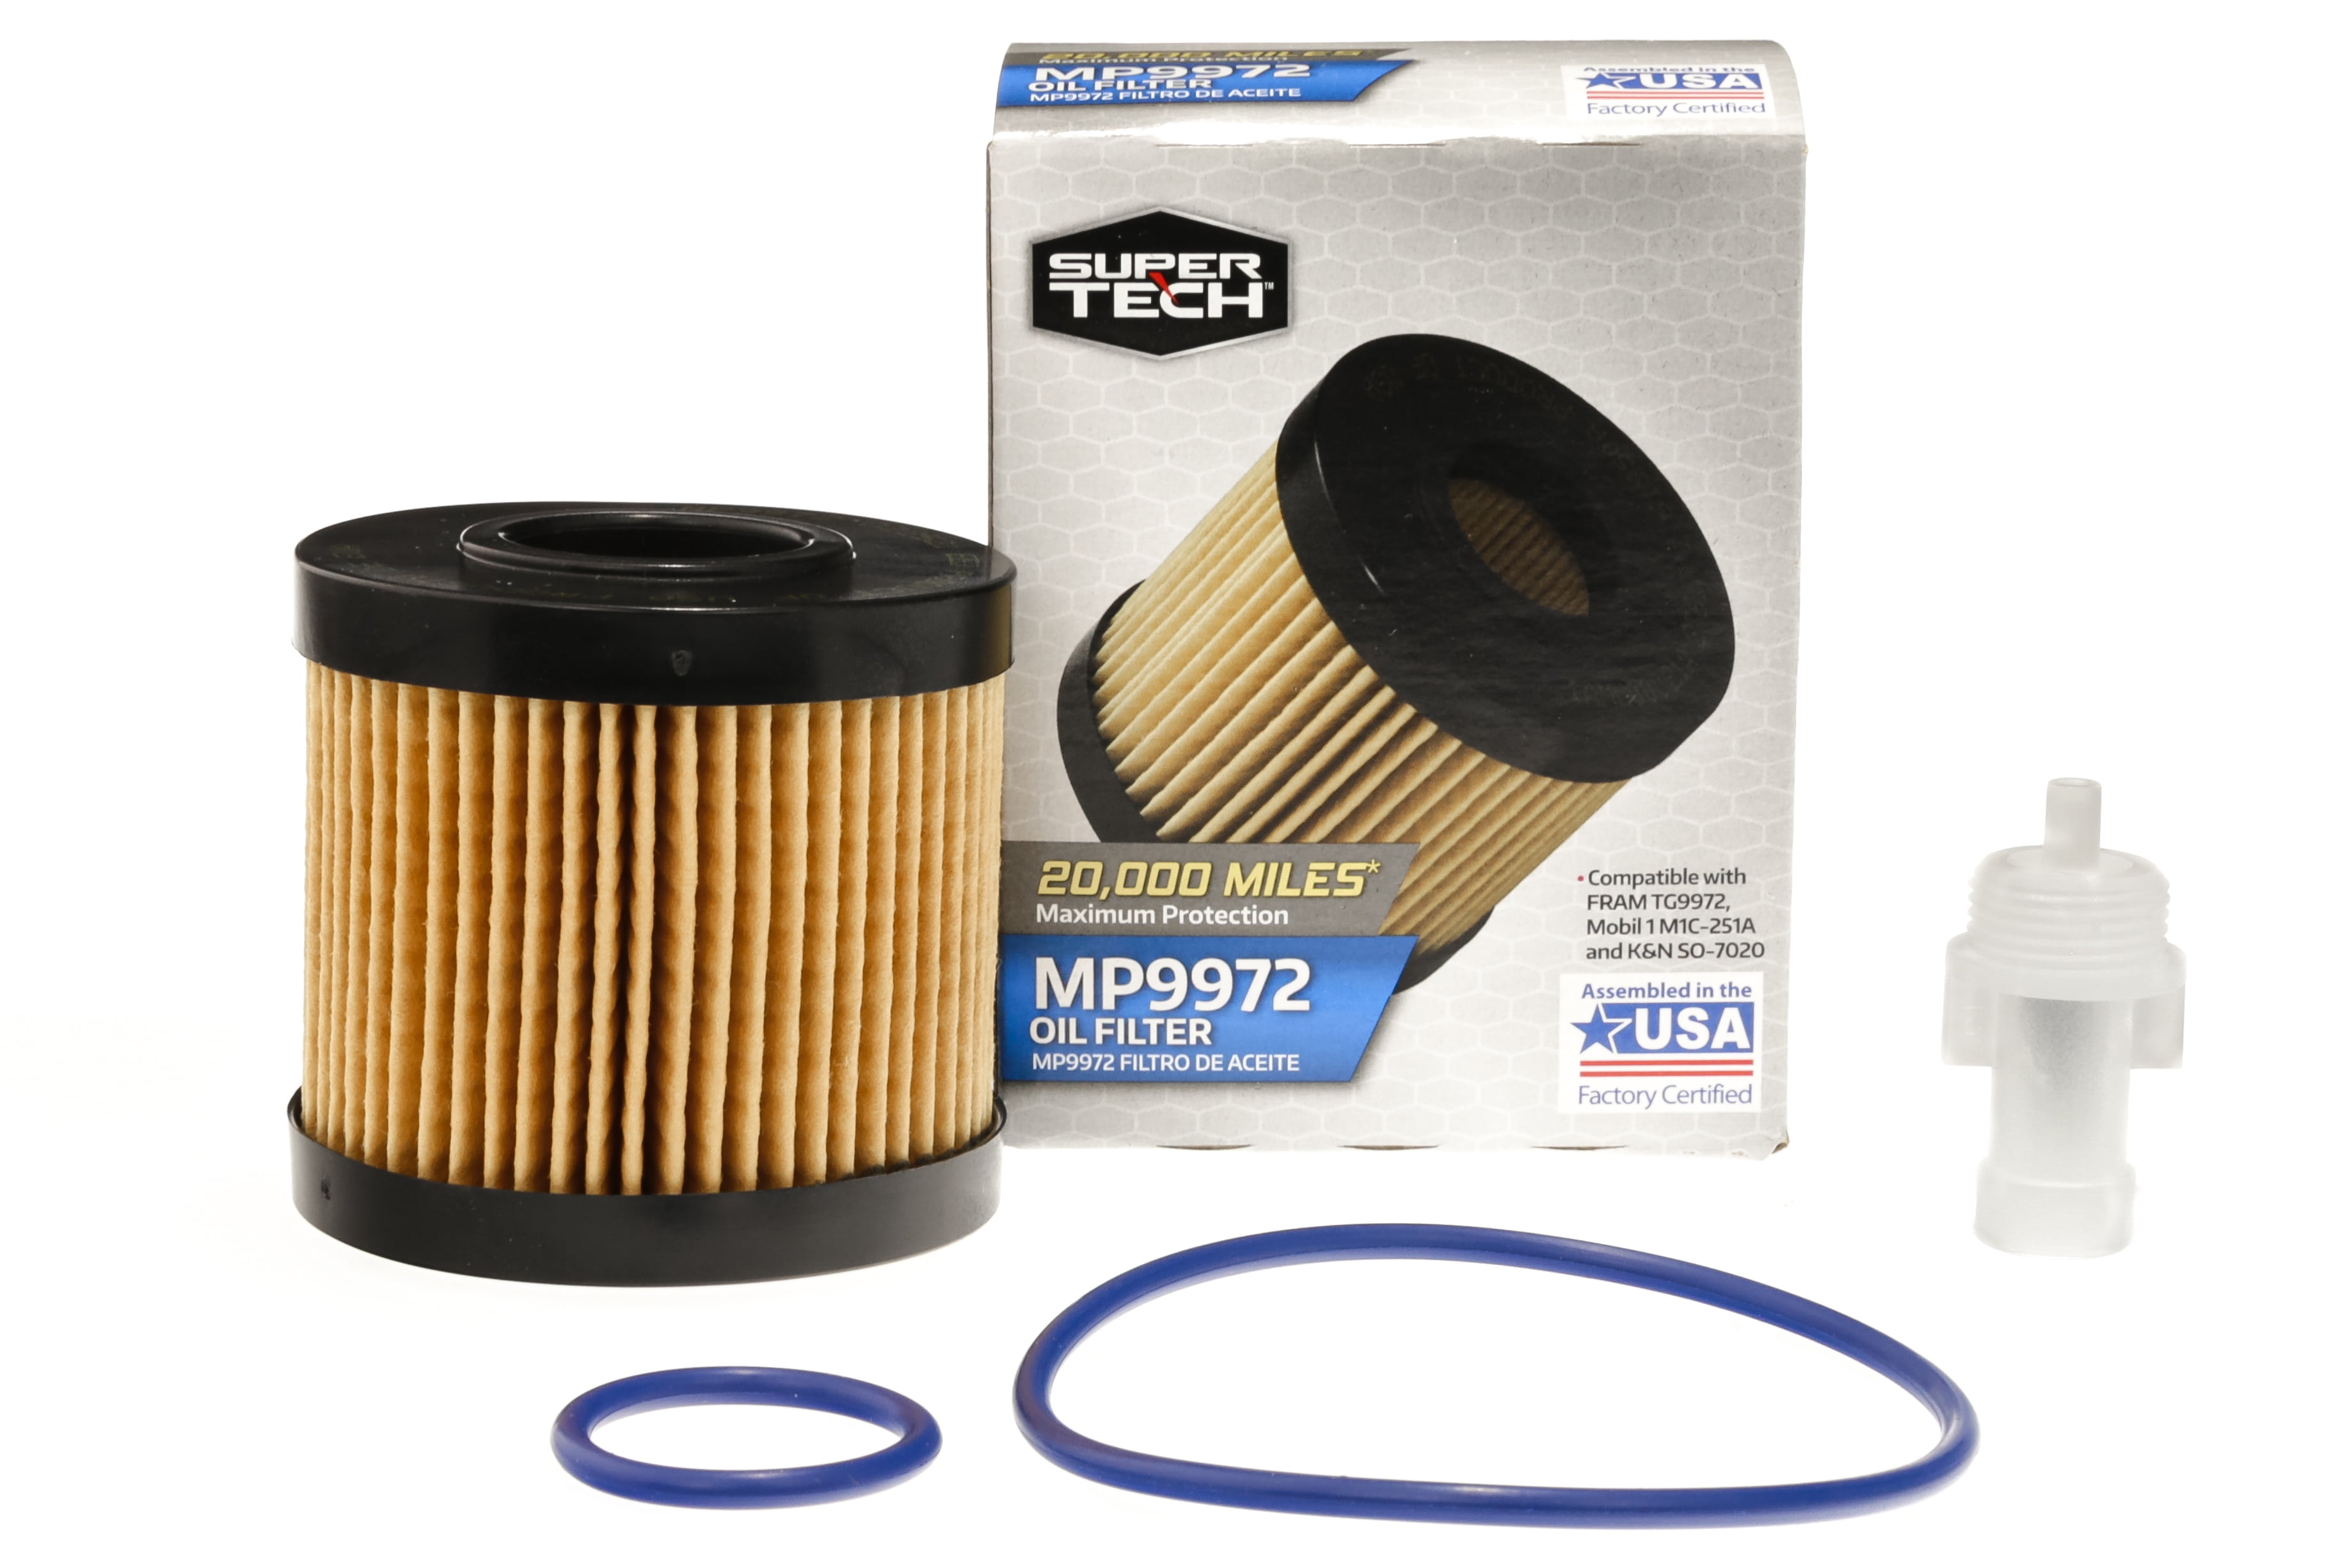 SuperTech Maximum Performance 20,000 mile Replacement Synthetic Oil Filter, MP9972, for Toyota and Lexus